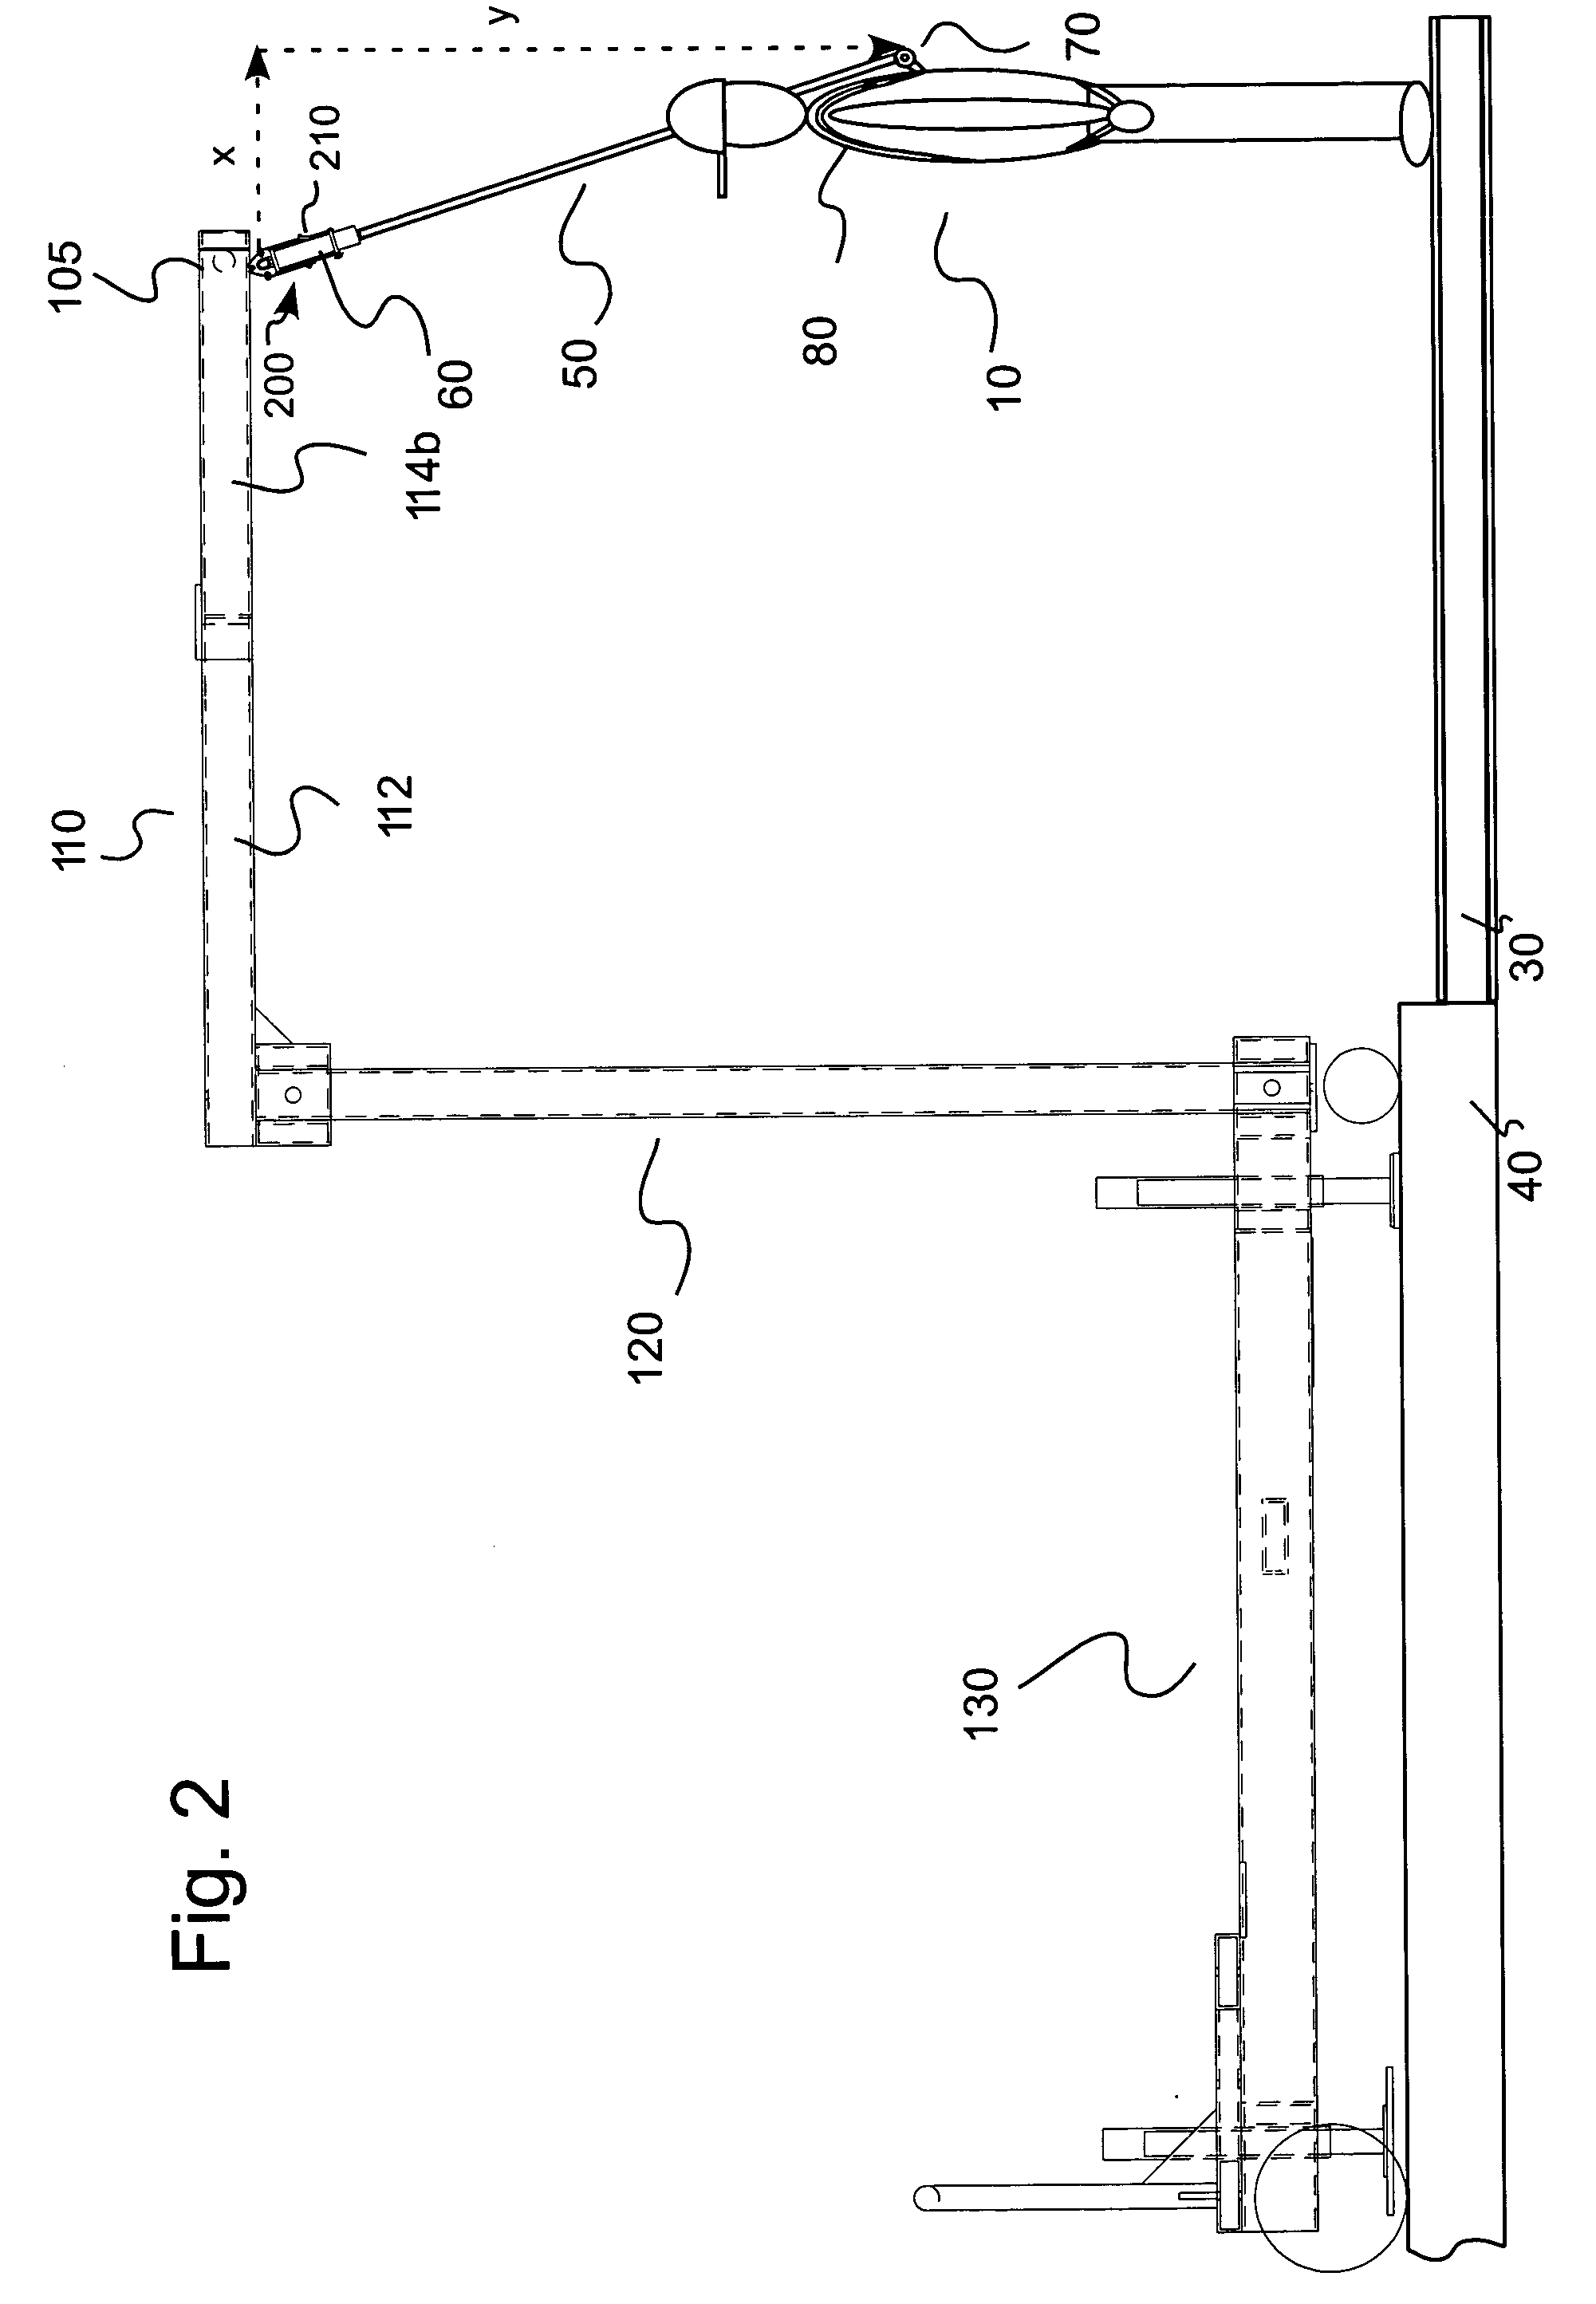 Retractable lanyard systems, anchoring brackets for retractable lanyards and methods of anchoring retractable lanyards